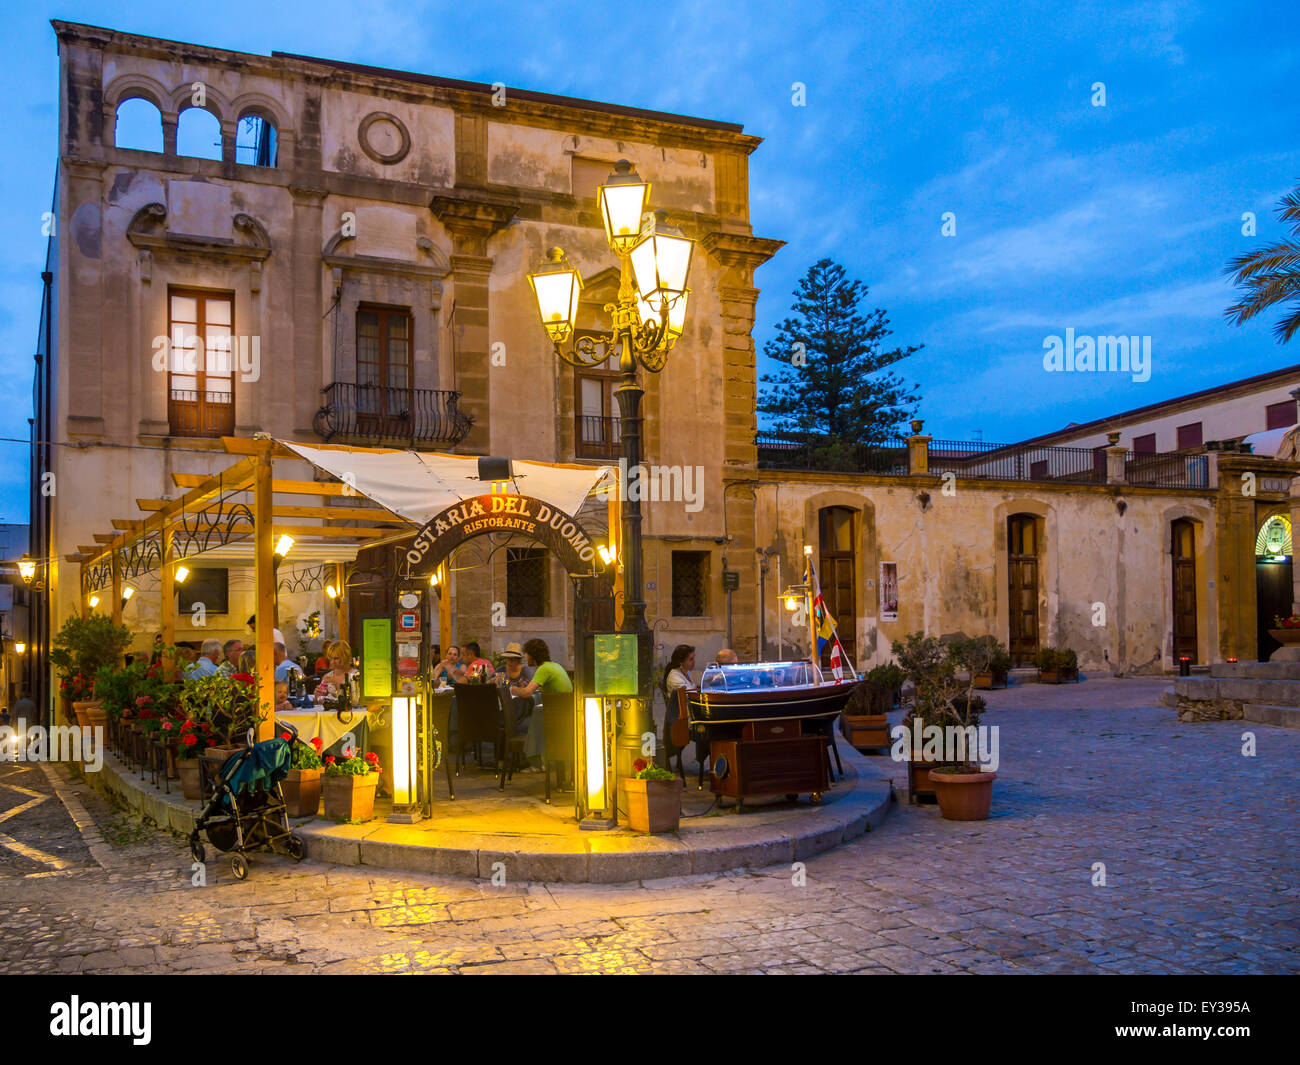 Restaurants on the Piazza del Duomo between medieval houses, Cefalu, Province of Palermo, Sicily, Italy Stock Photo